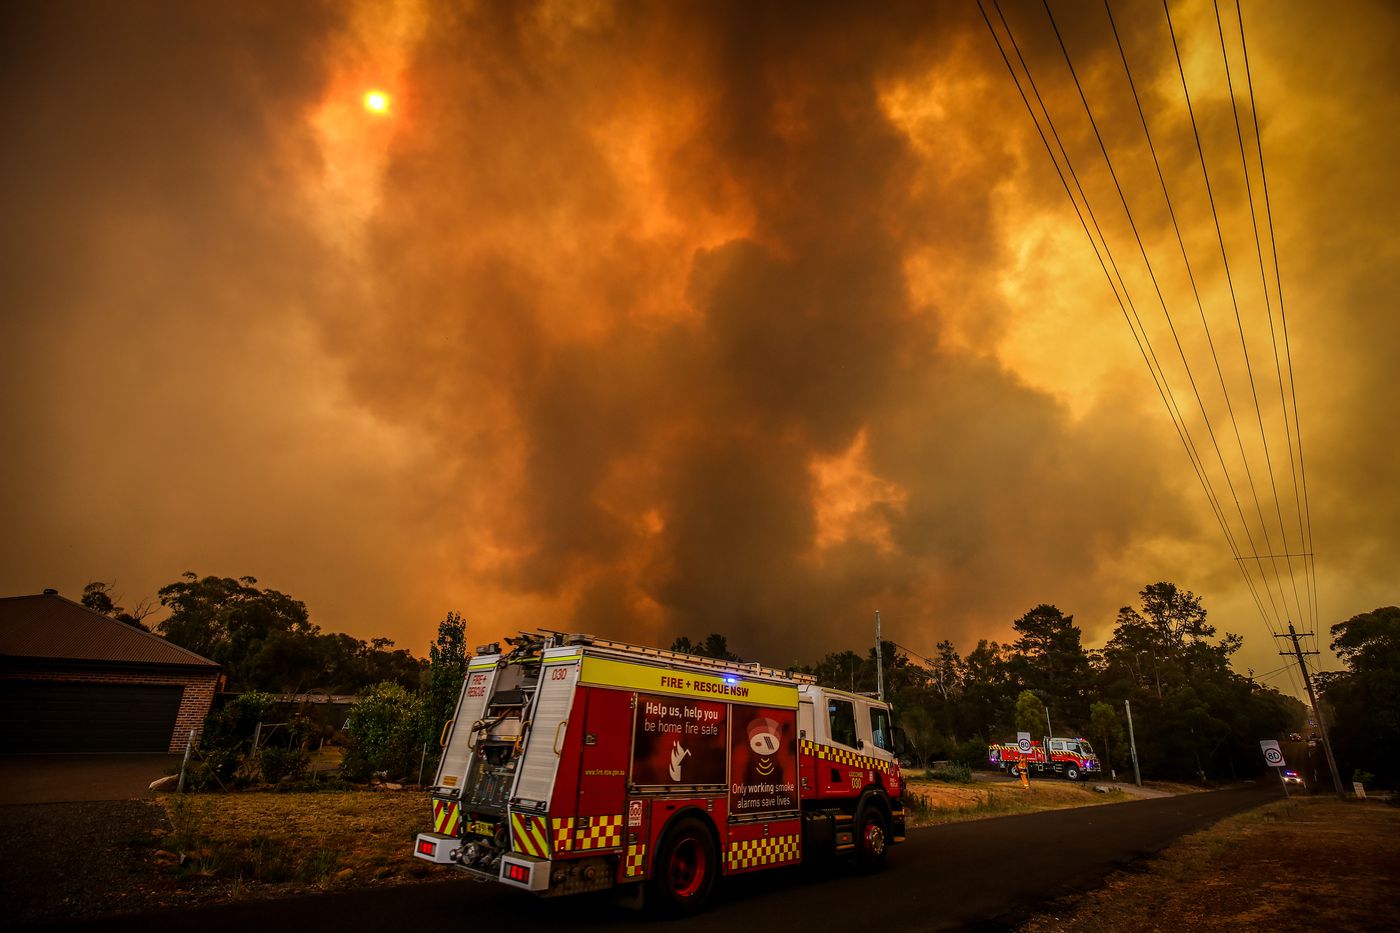 What You Need To Know About The Australia Bushfires The Verge